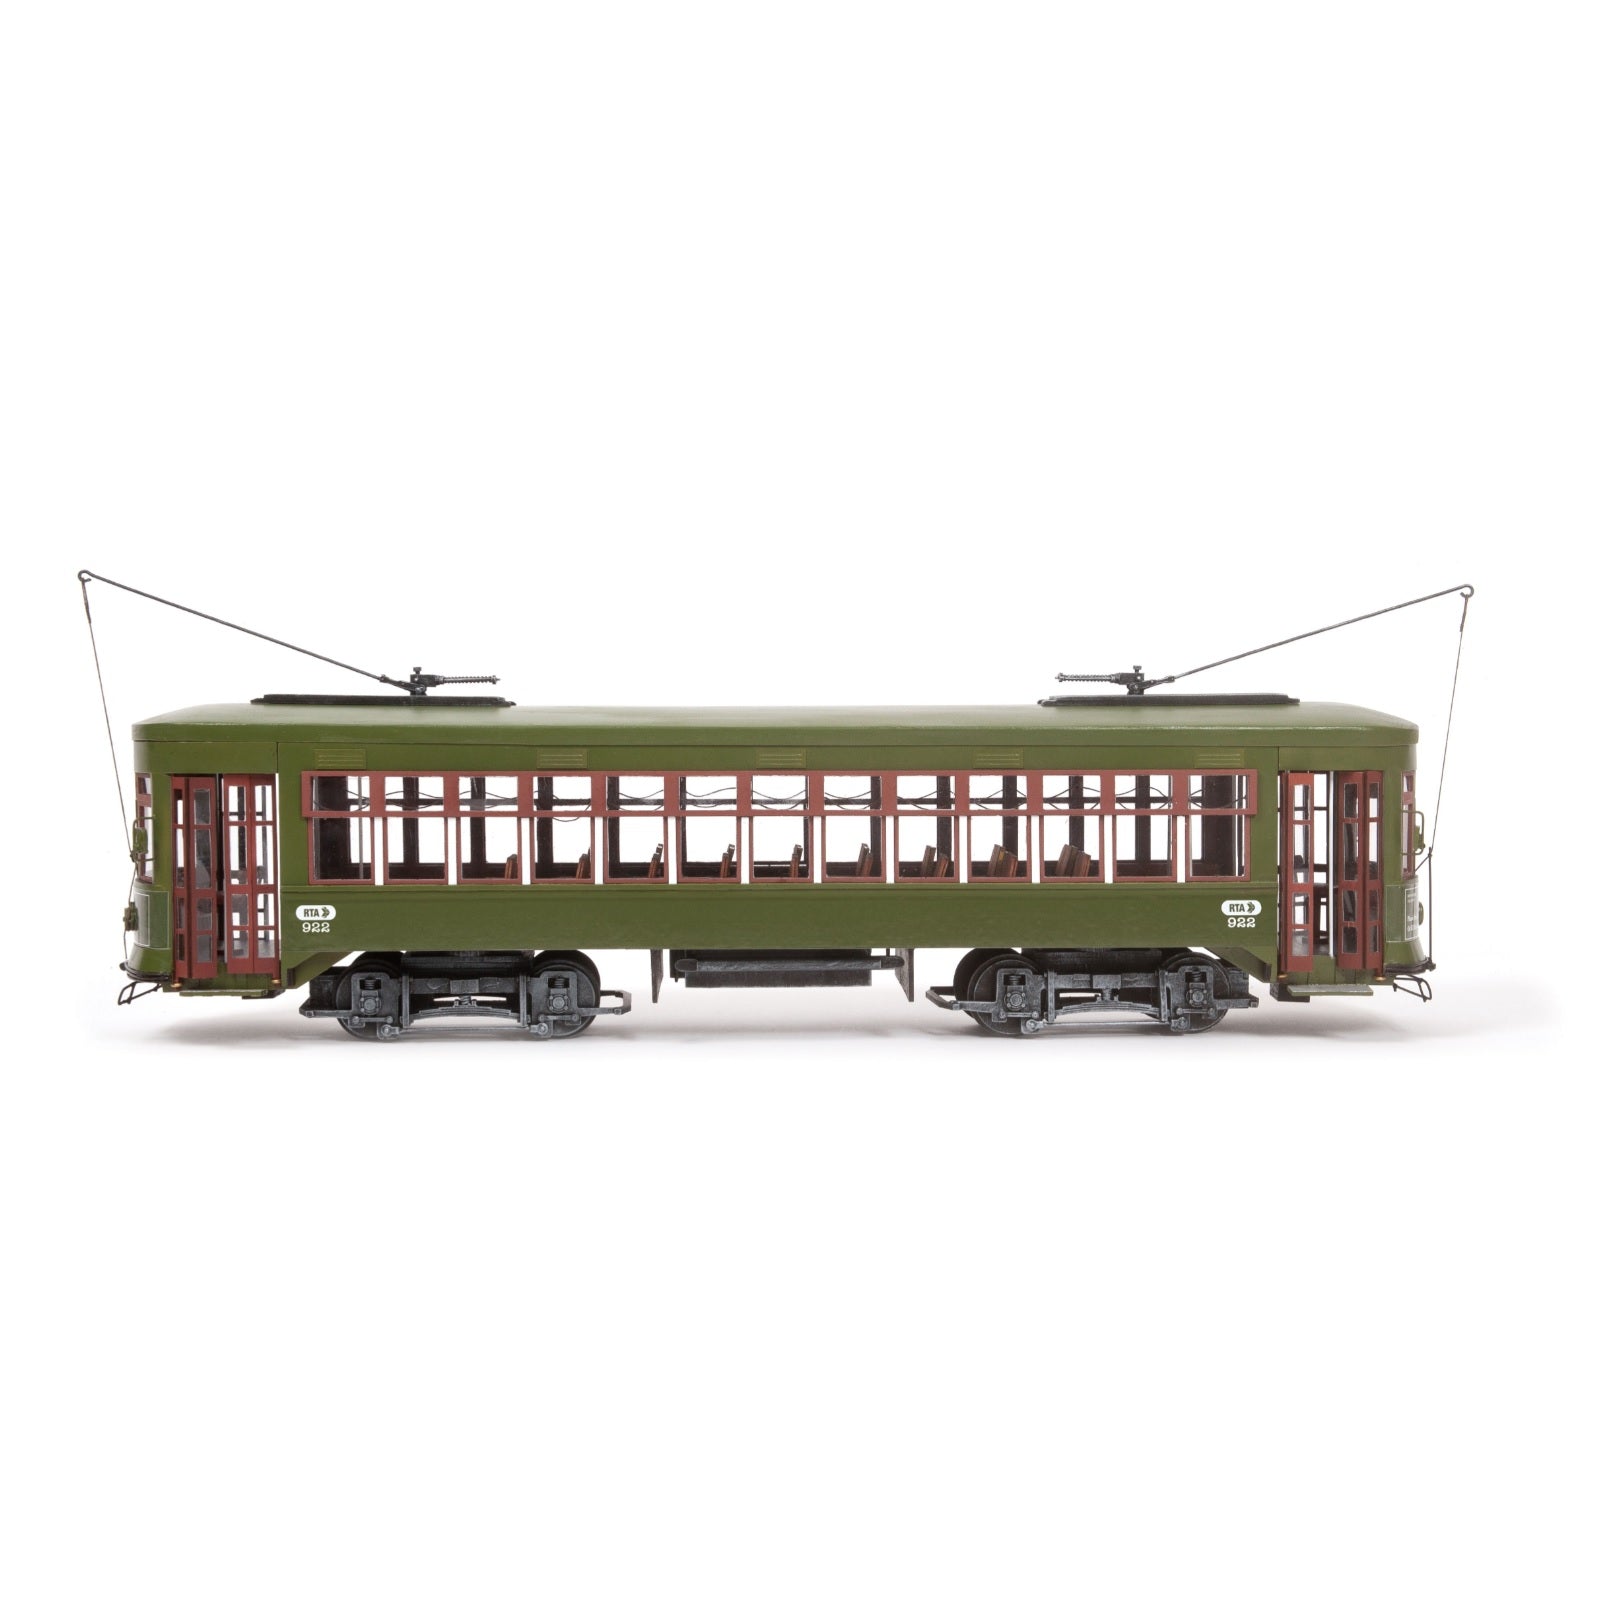 OcCre New Orleans Streetcar Model Kit, 1/24 Scale - Micro - Mark Scale Model Kits